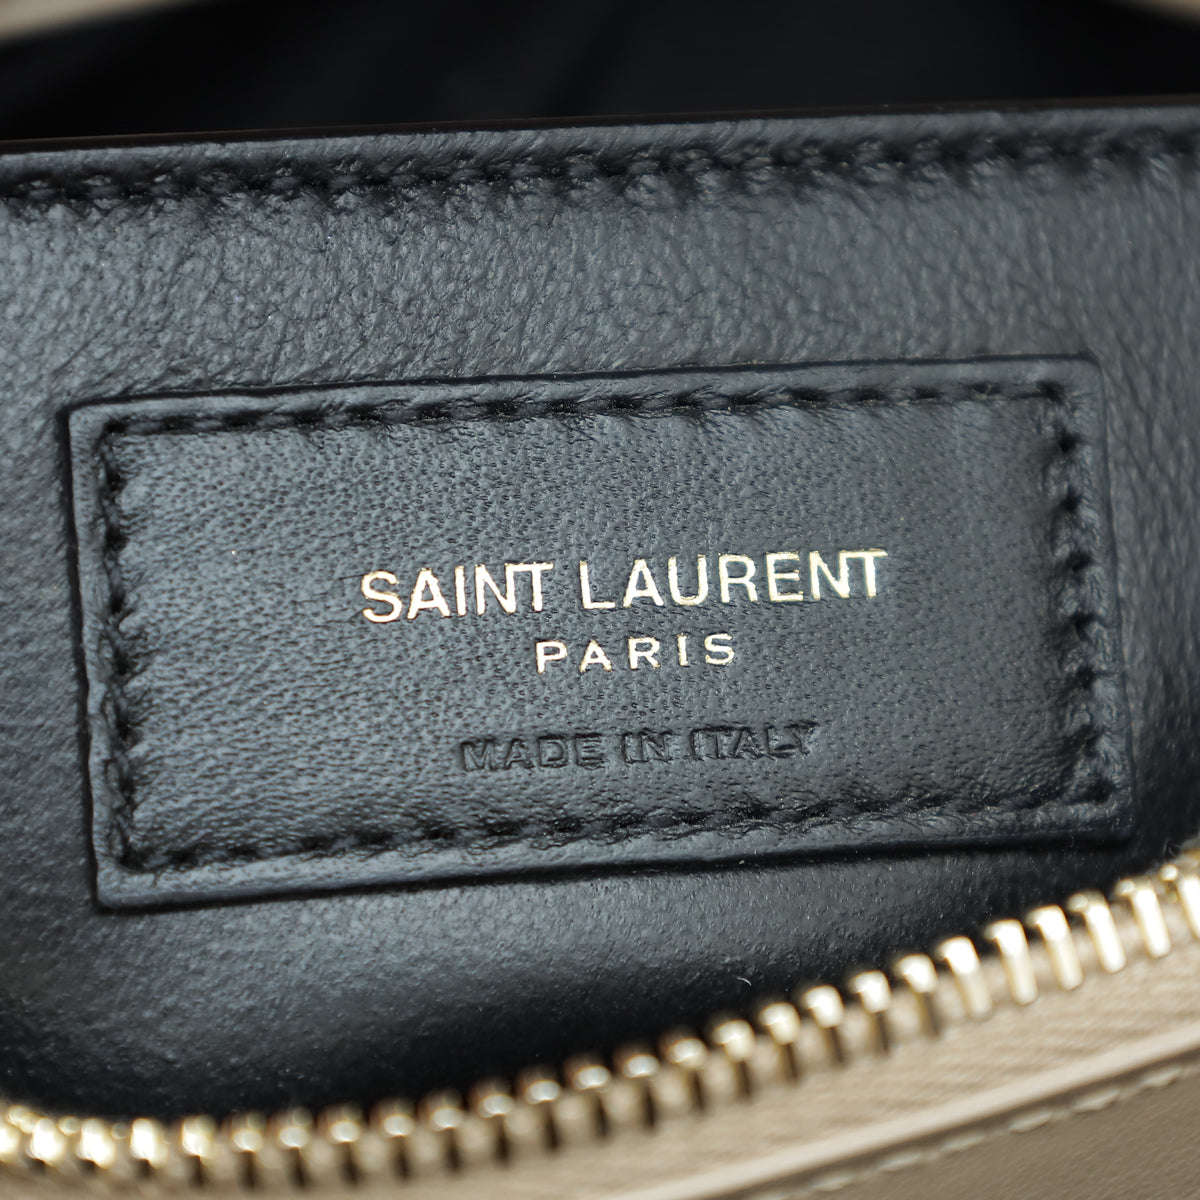 YSL Beige Loulou Small Bag